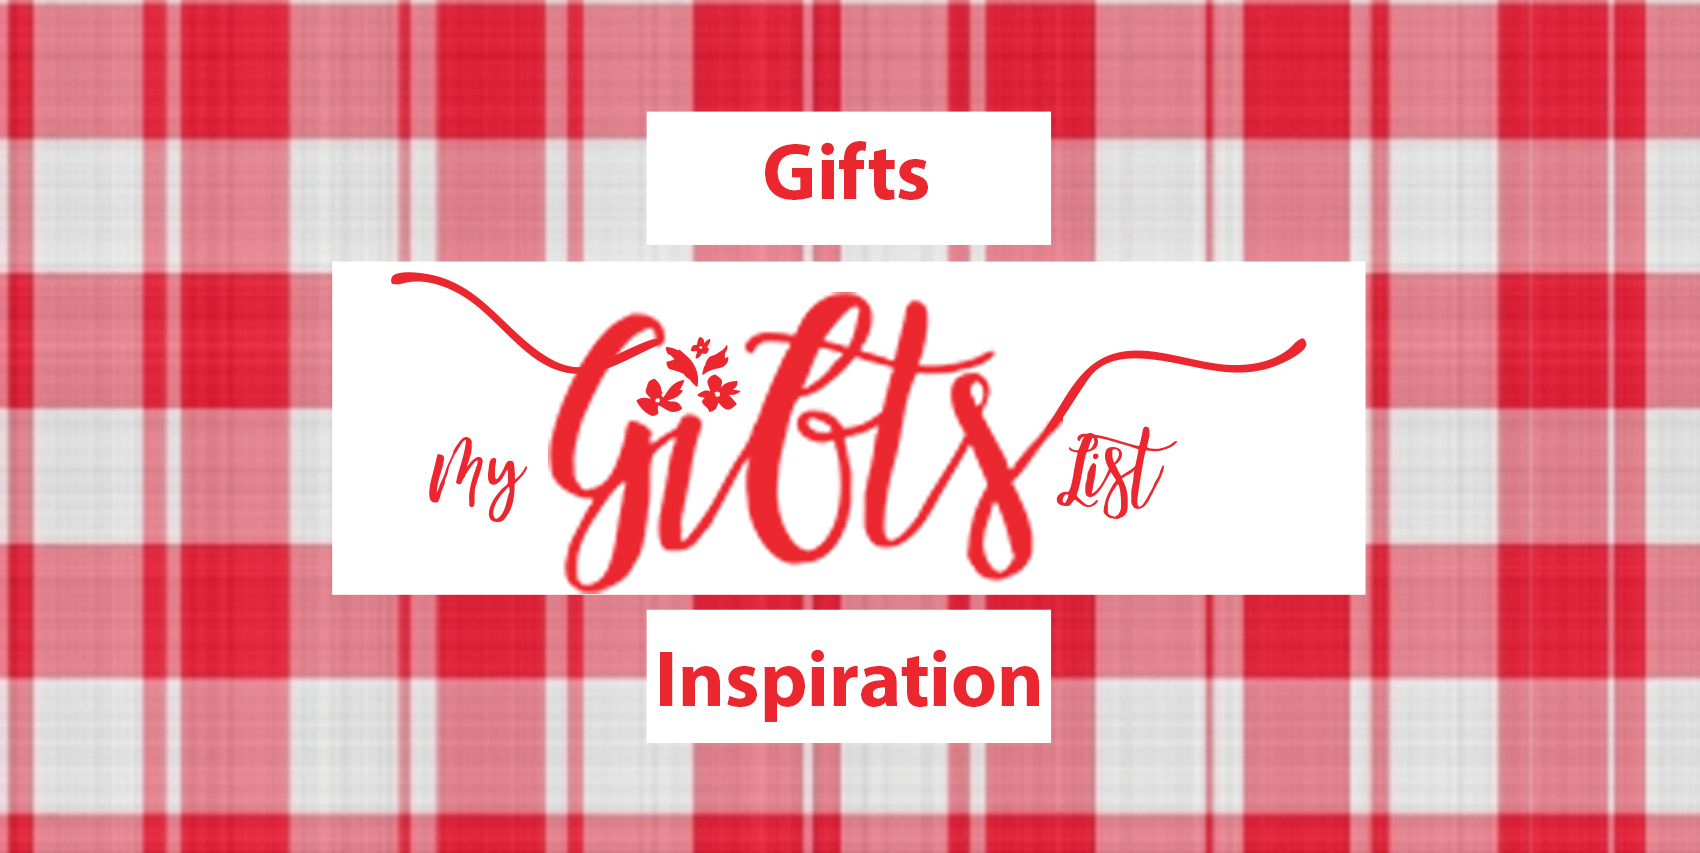 With over 10000 gifts ideas to choose from, we offer one of the biggest gifts inspiration database available.